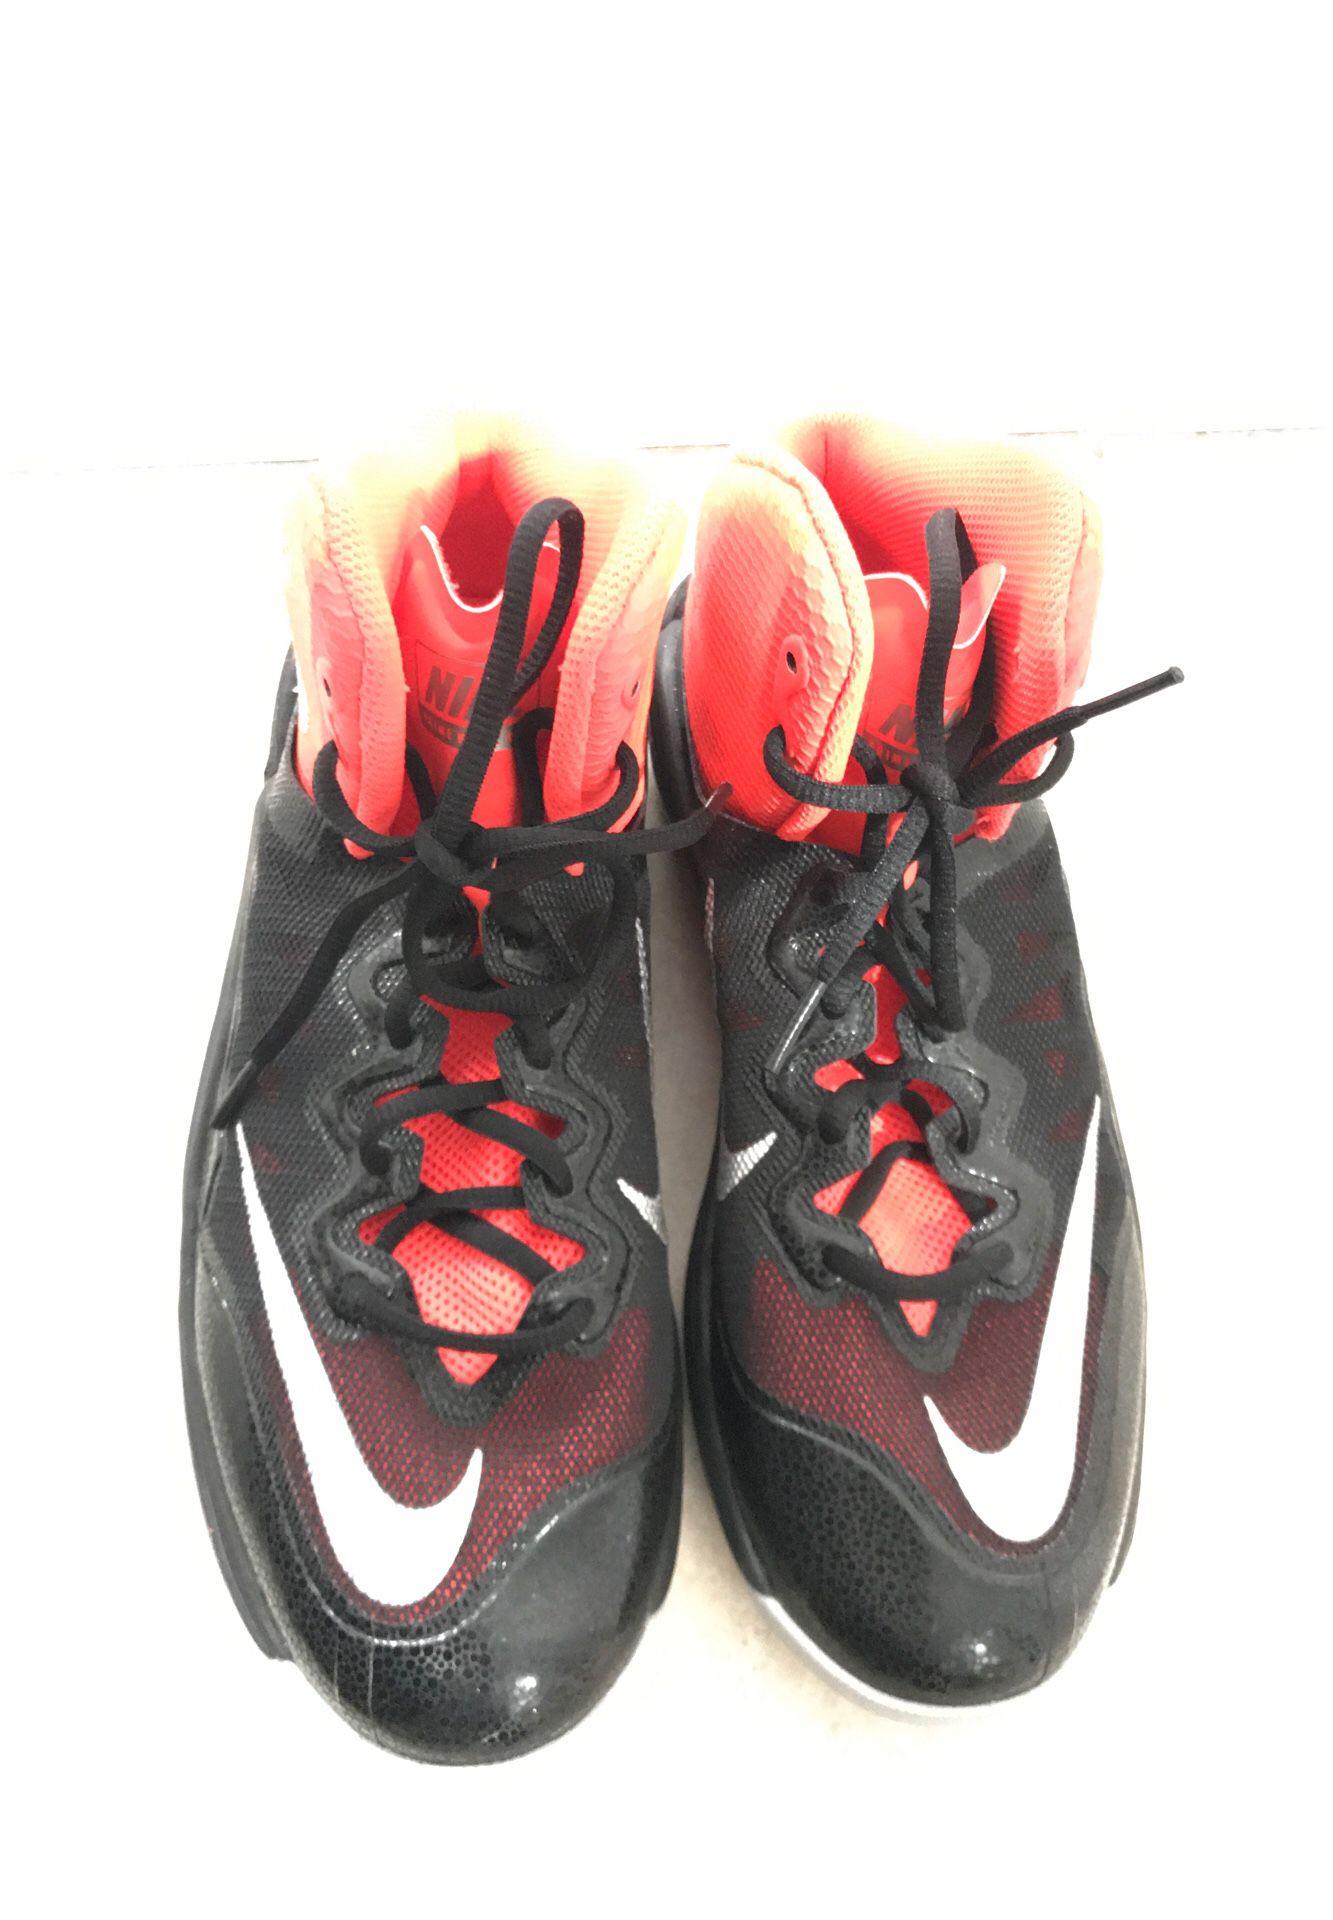 Mens NIKE PRIME HYPE DF II Basketball Shoes Size 7.5